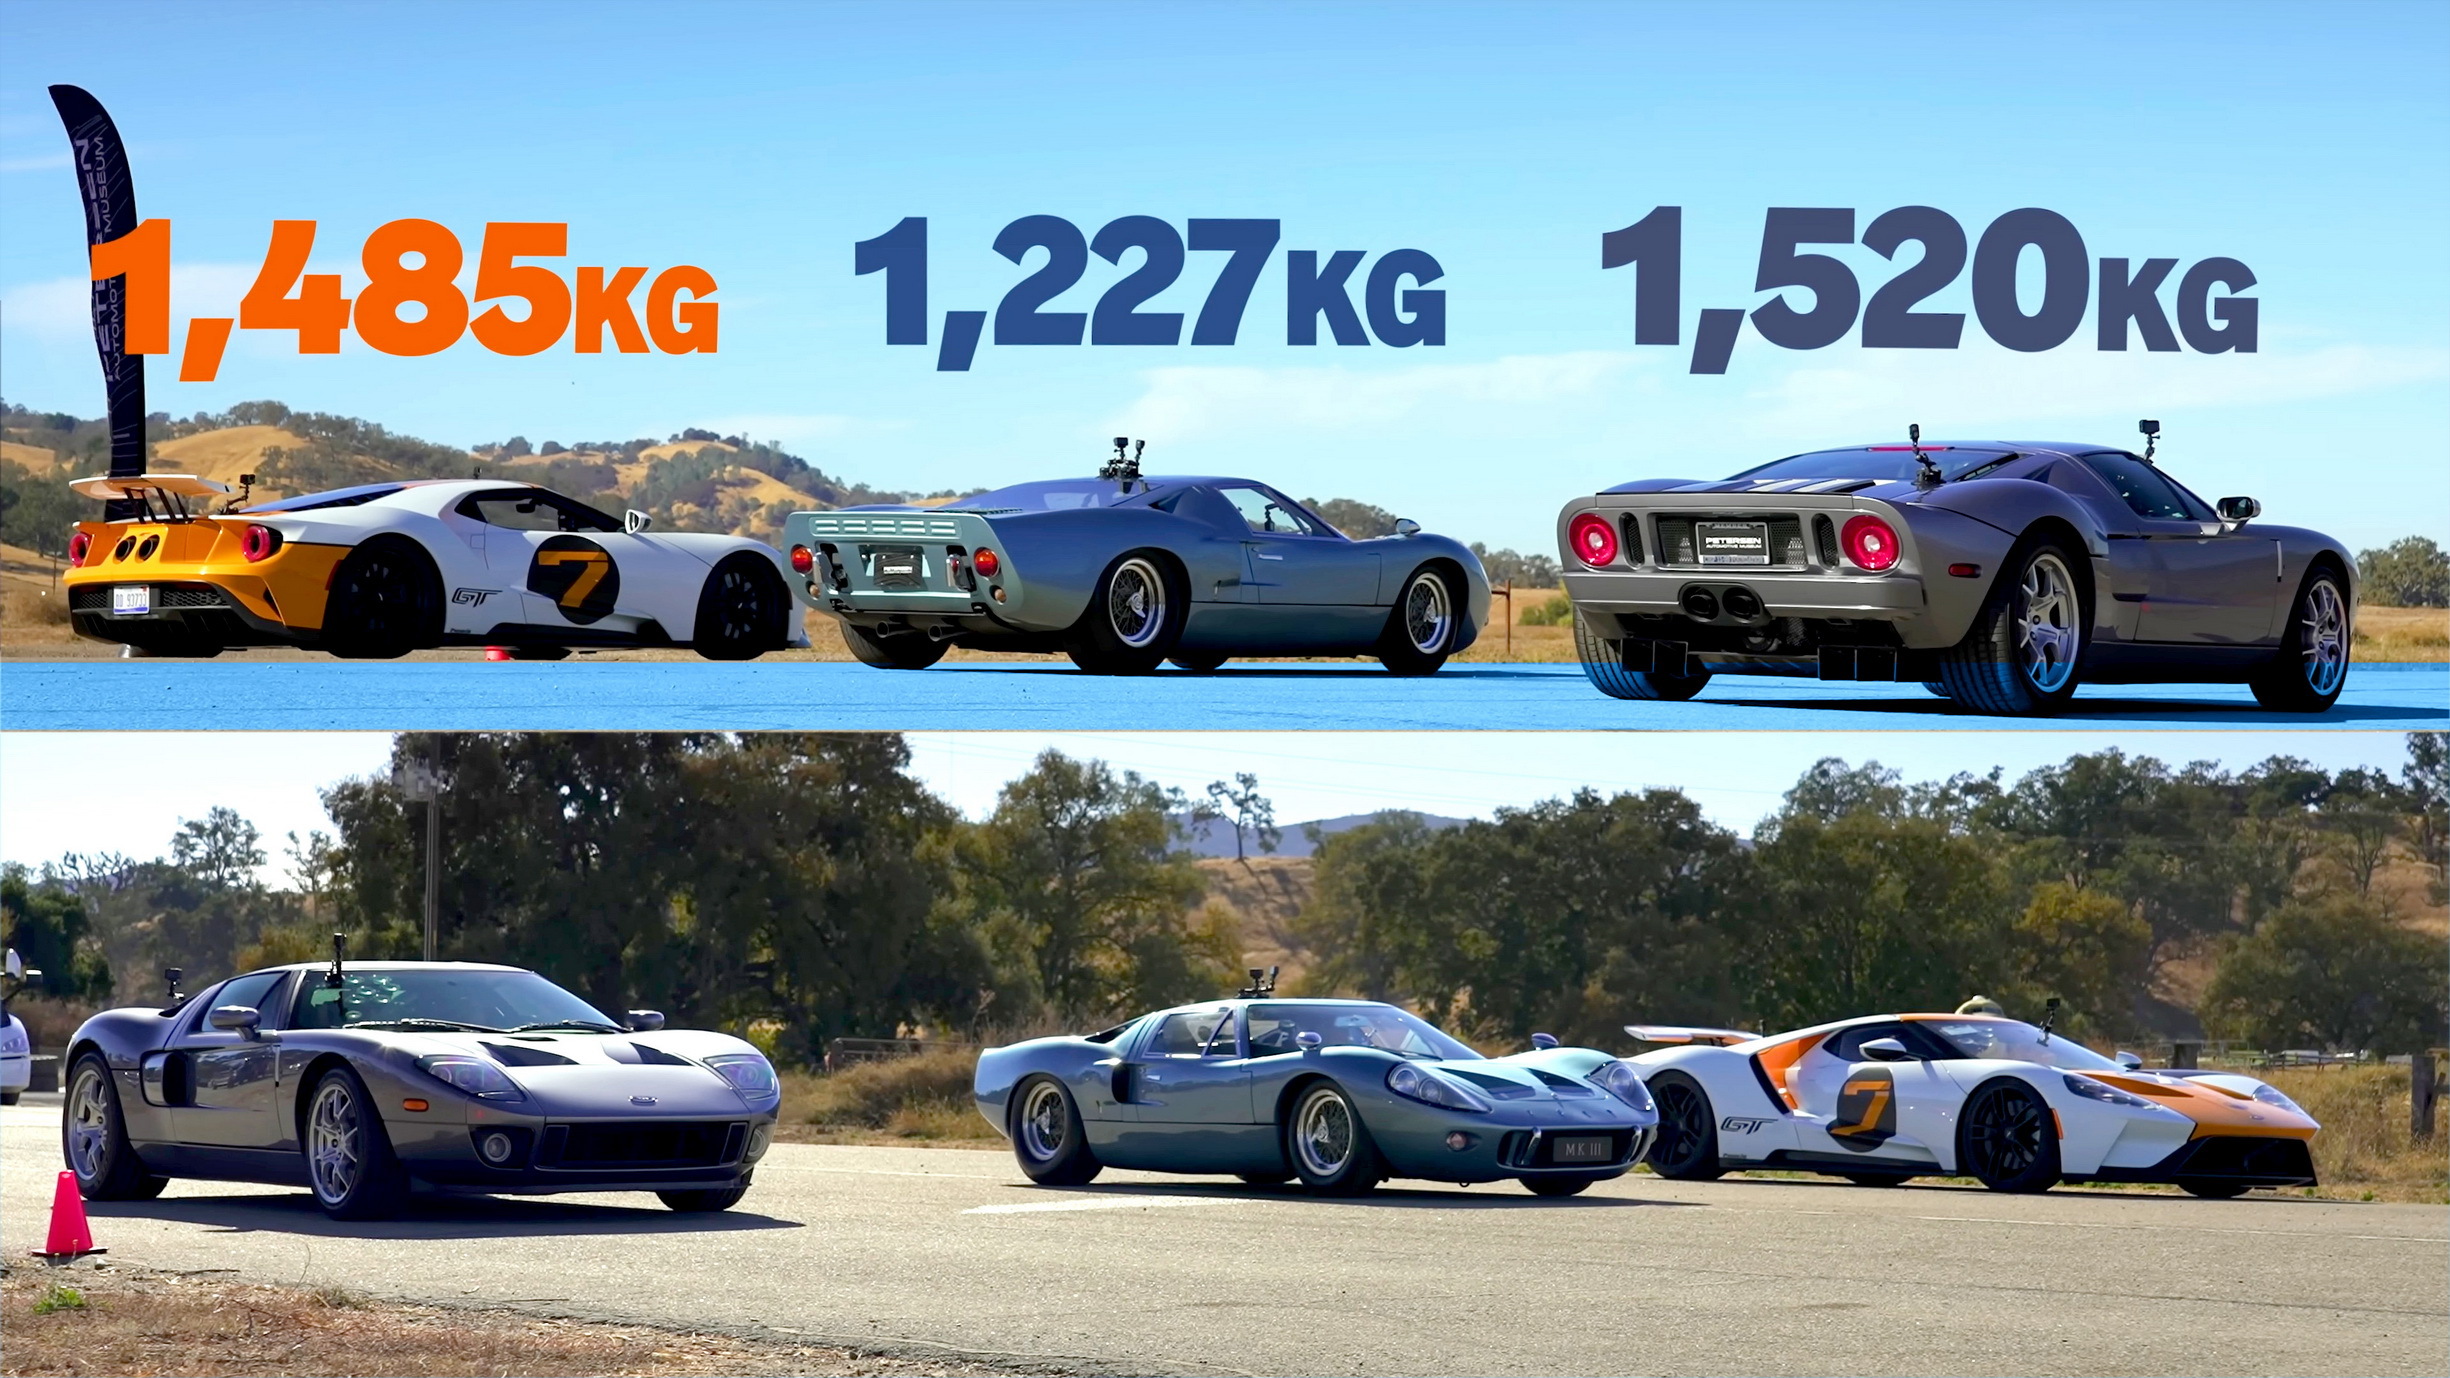 Ford GT Drag Racing: A Journey Through 50 Years of Technological Advancements